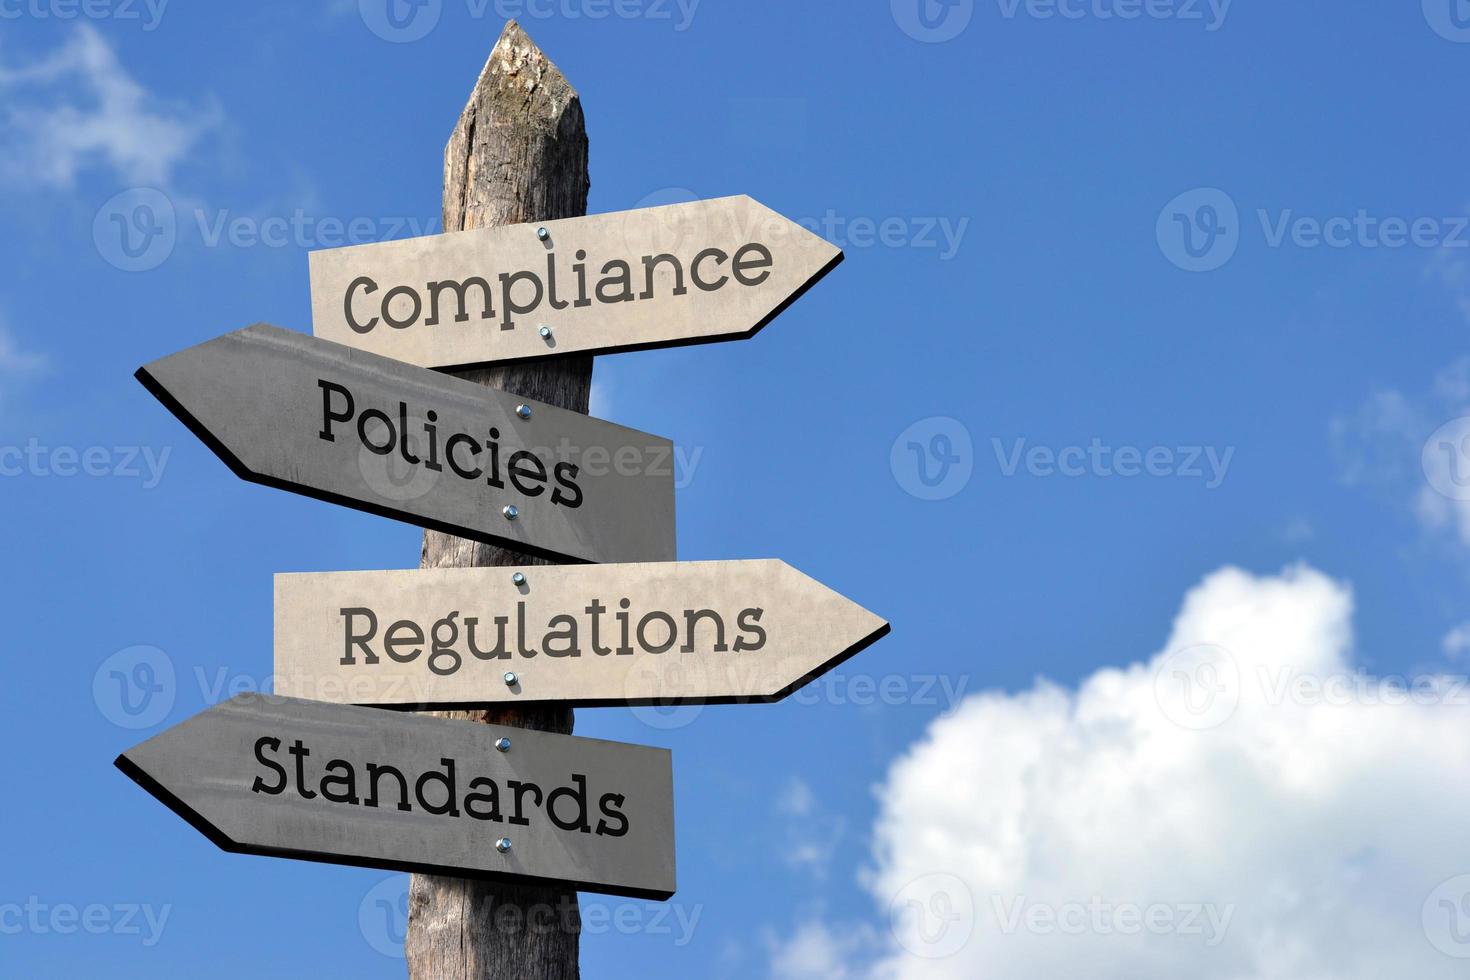 Compliance, Regulations, Policies, Standards - Wooden Signpost with Four Arrows, Sky with Clouds photo